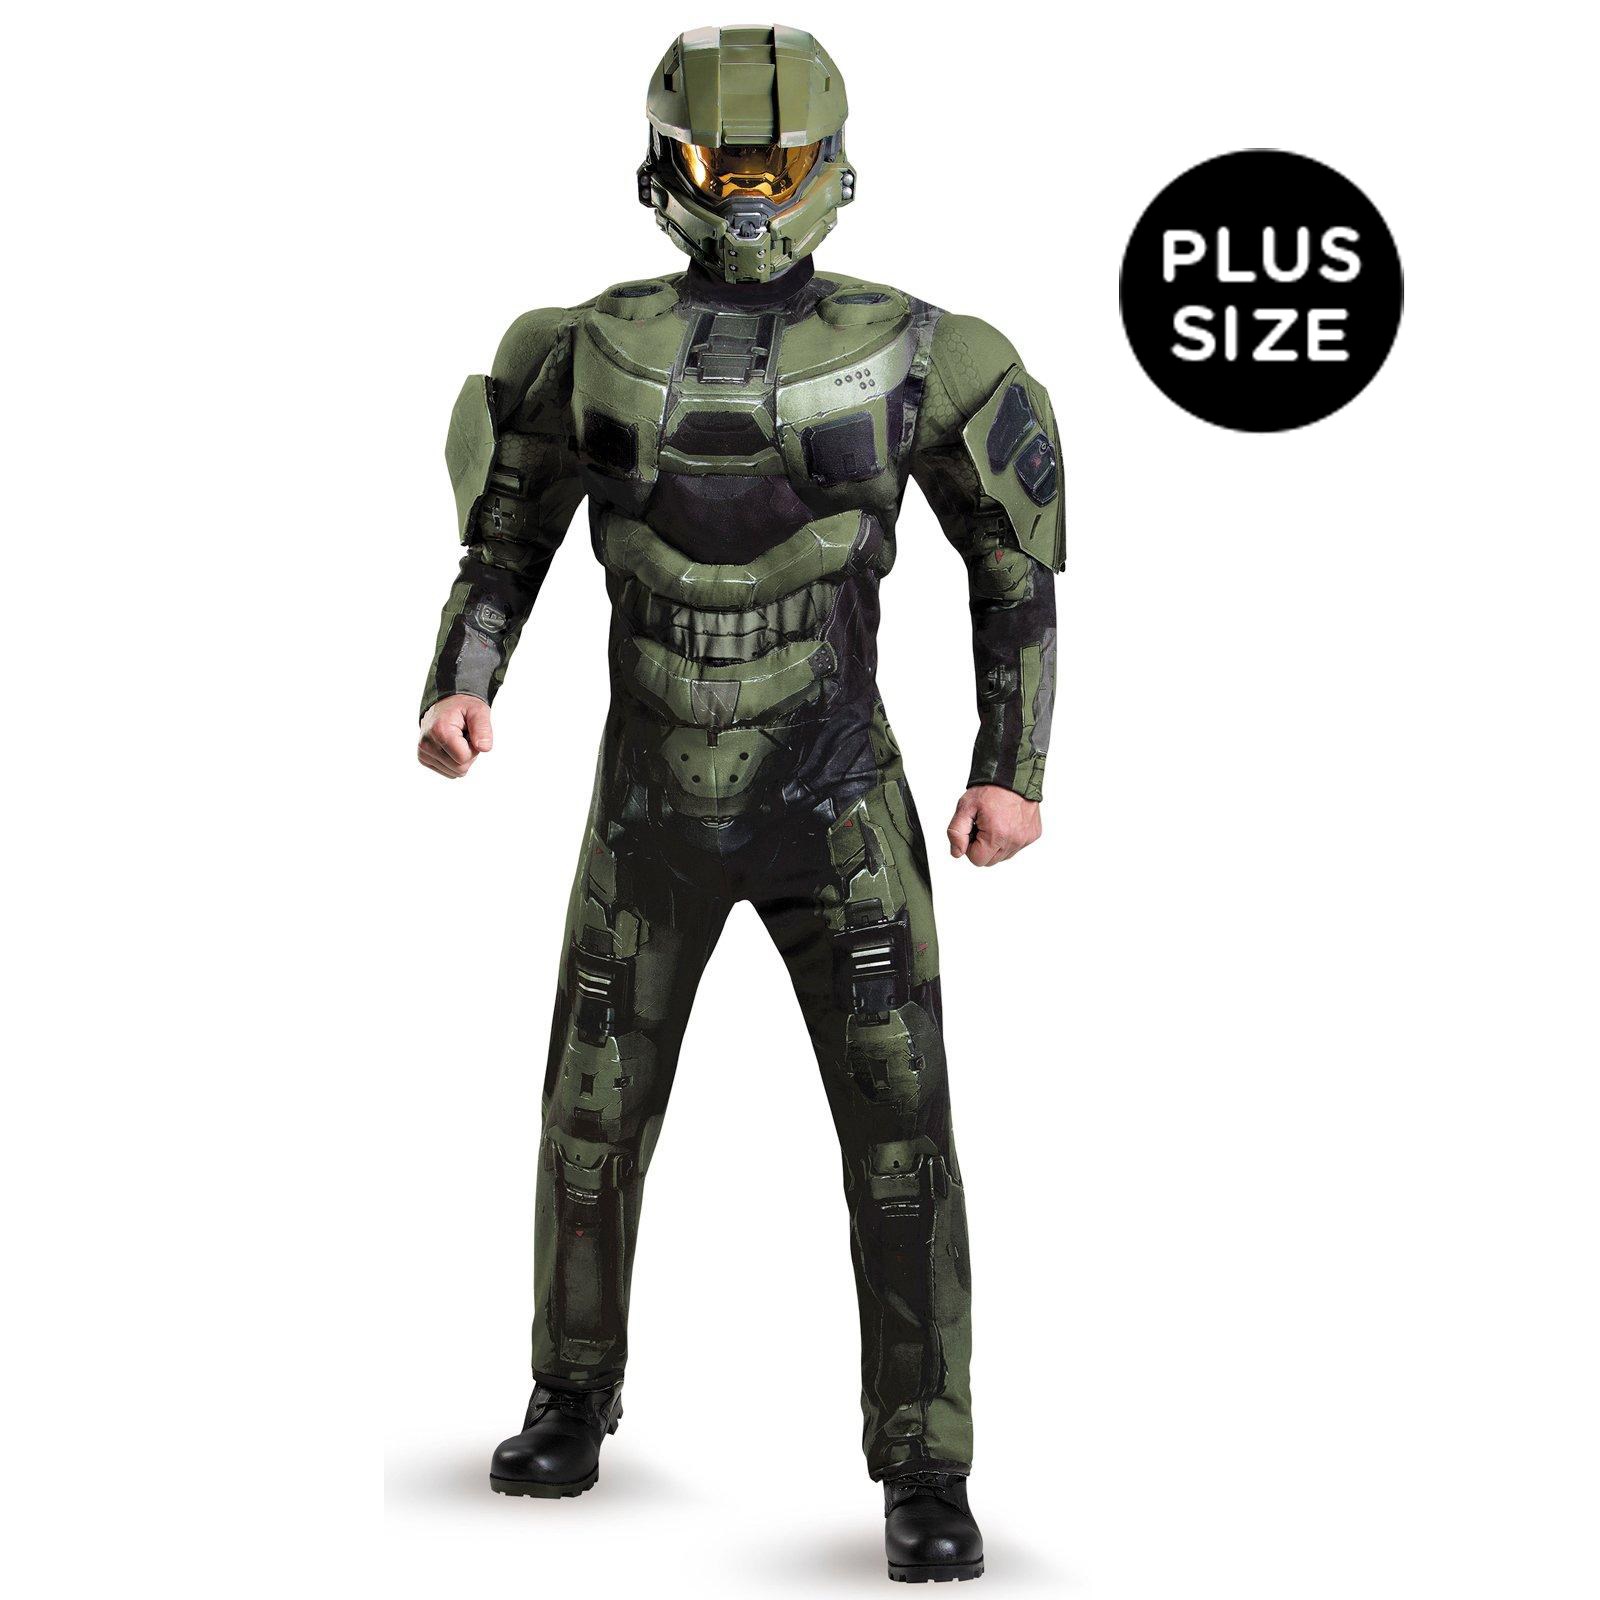 Halo: Deluxe Plus Size Muscle Master Chief Costume For Adults